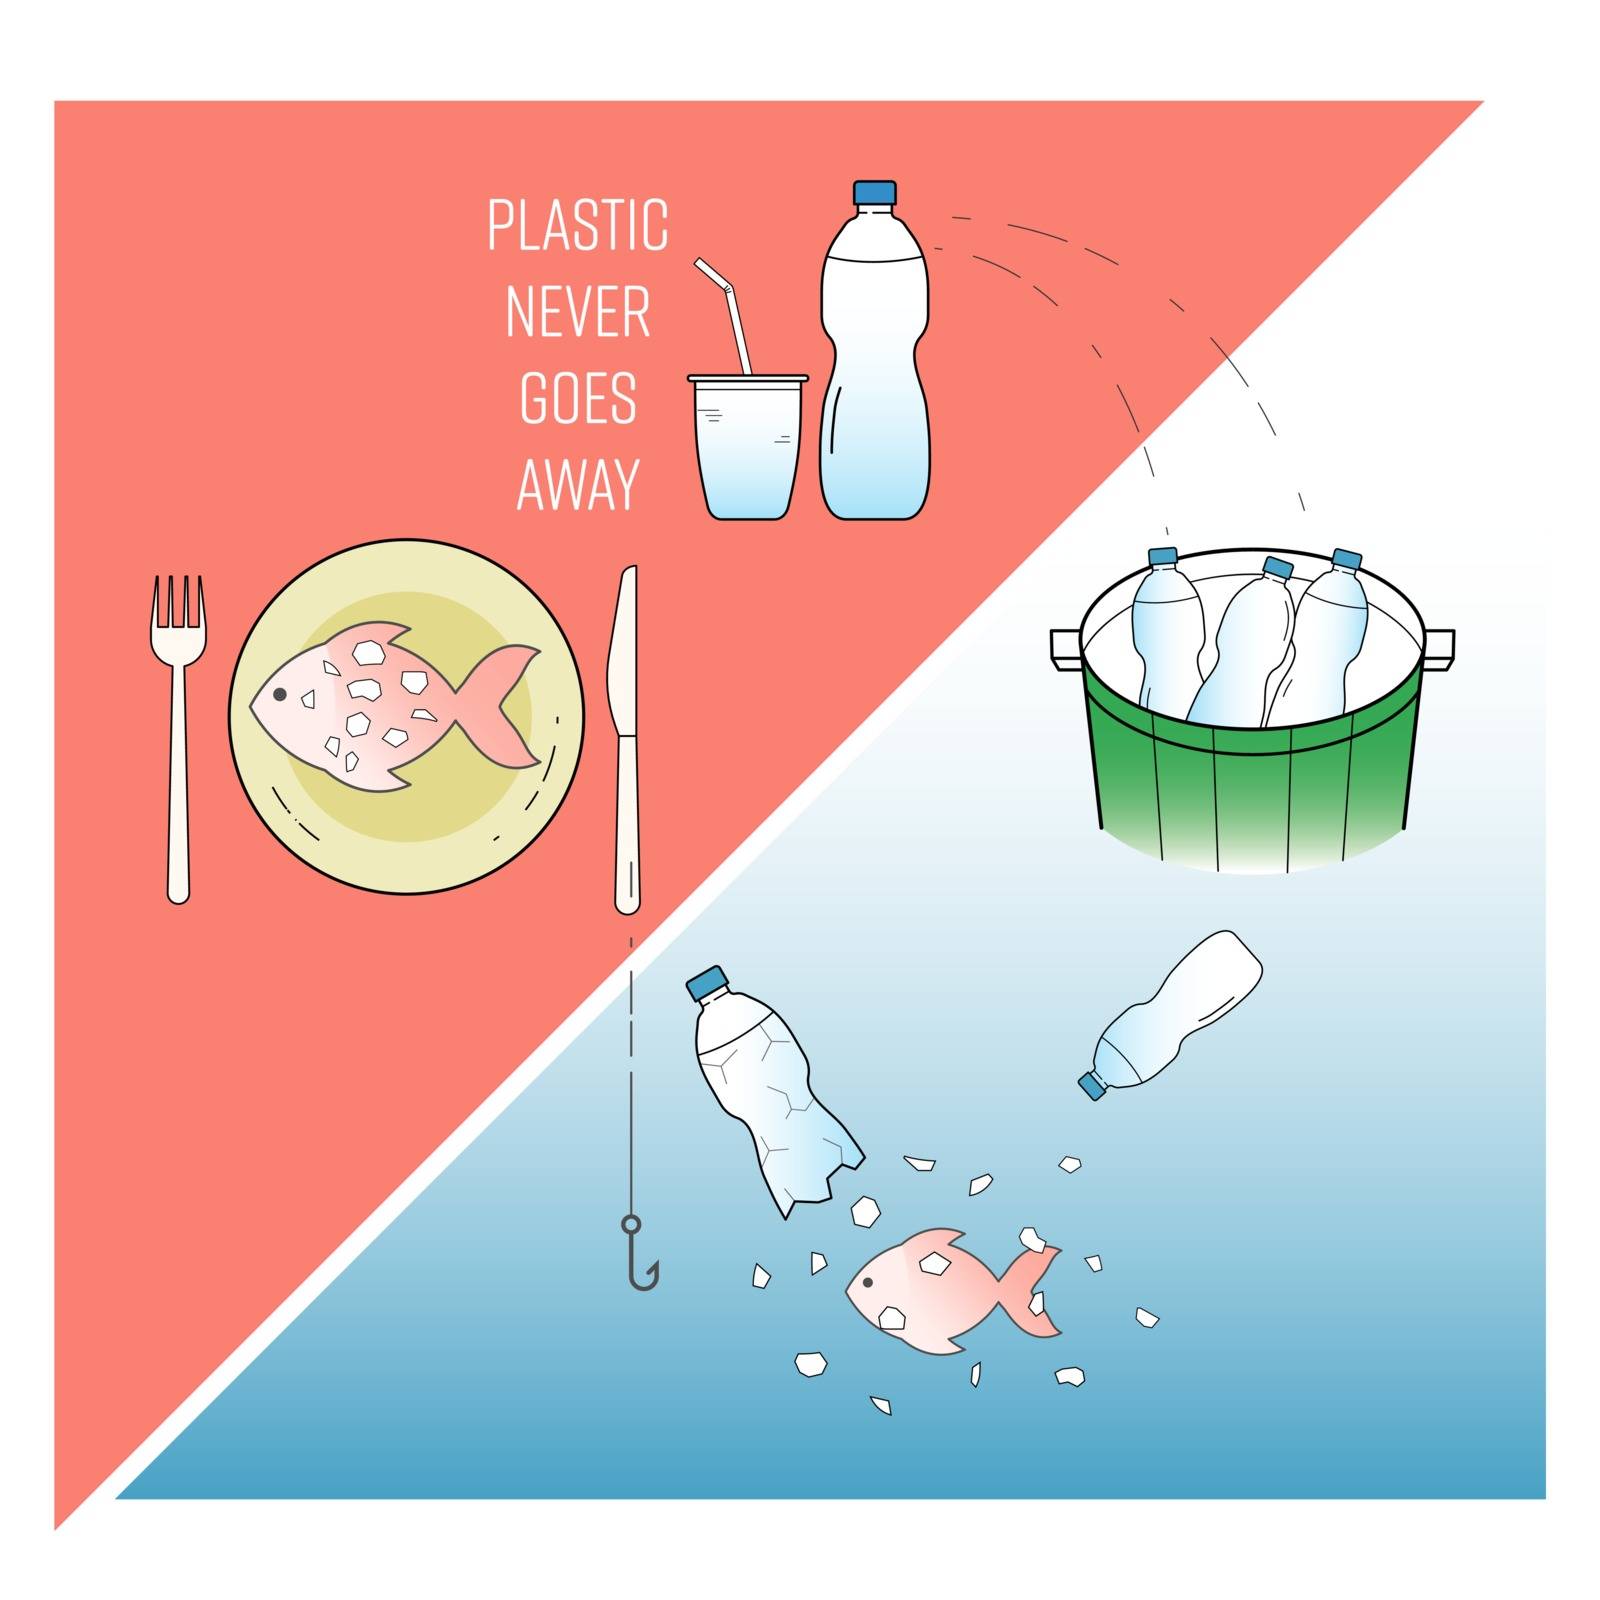 Single-use plastic waste end up in the ocean, break down and enter our food chain. Plastic never goes away concept. Vector illustration outline flat design style.